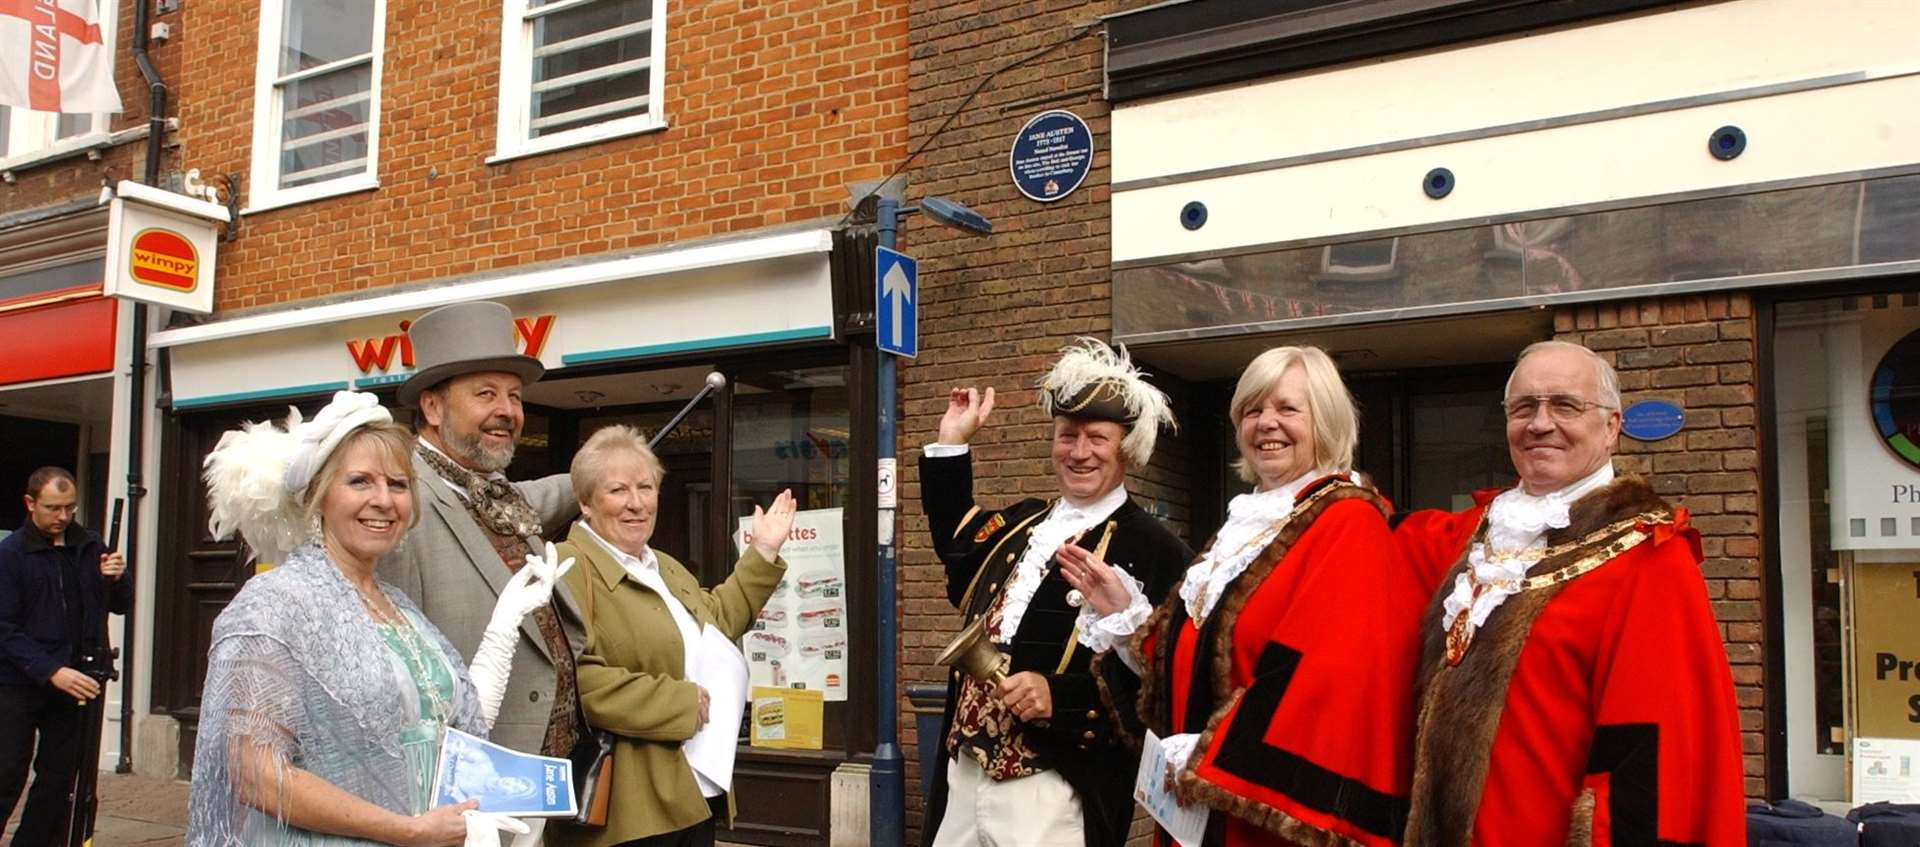 The unveiling of a Plaque for Jane Austen in Dartford High Street Picture: Jim Rantell